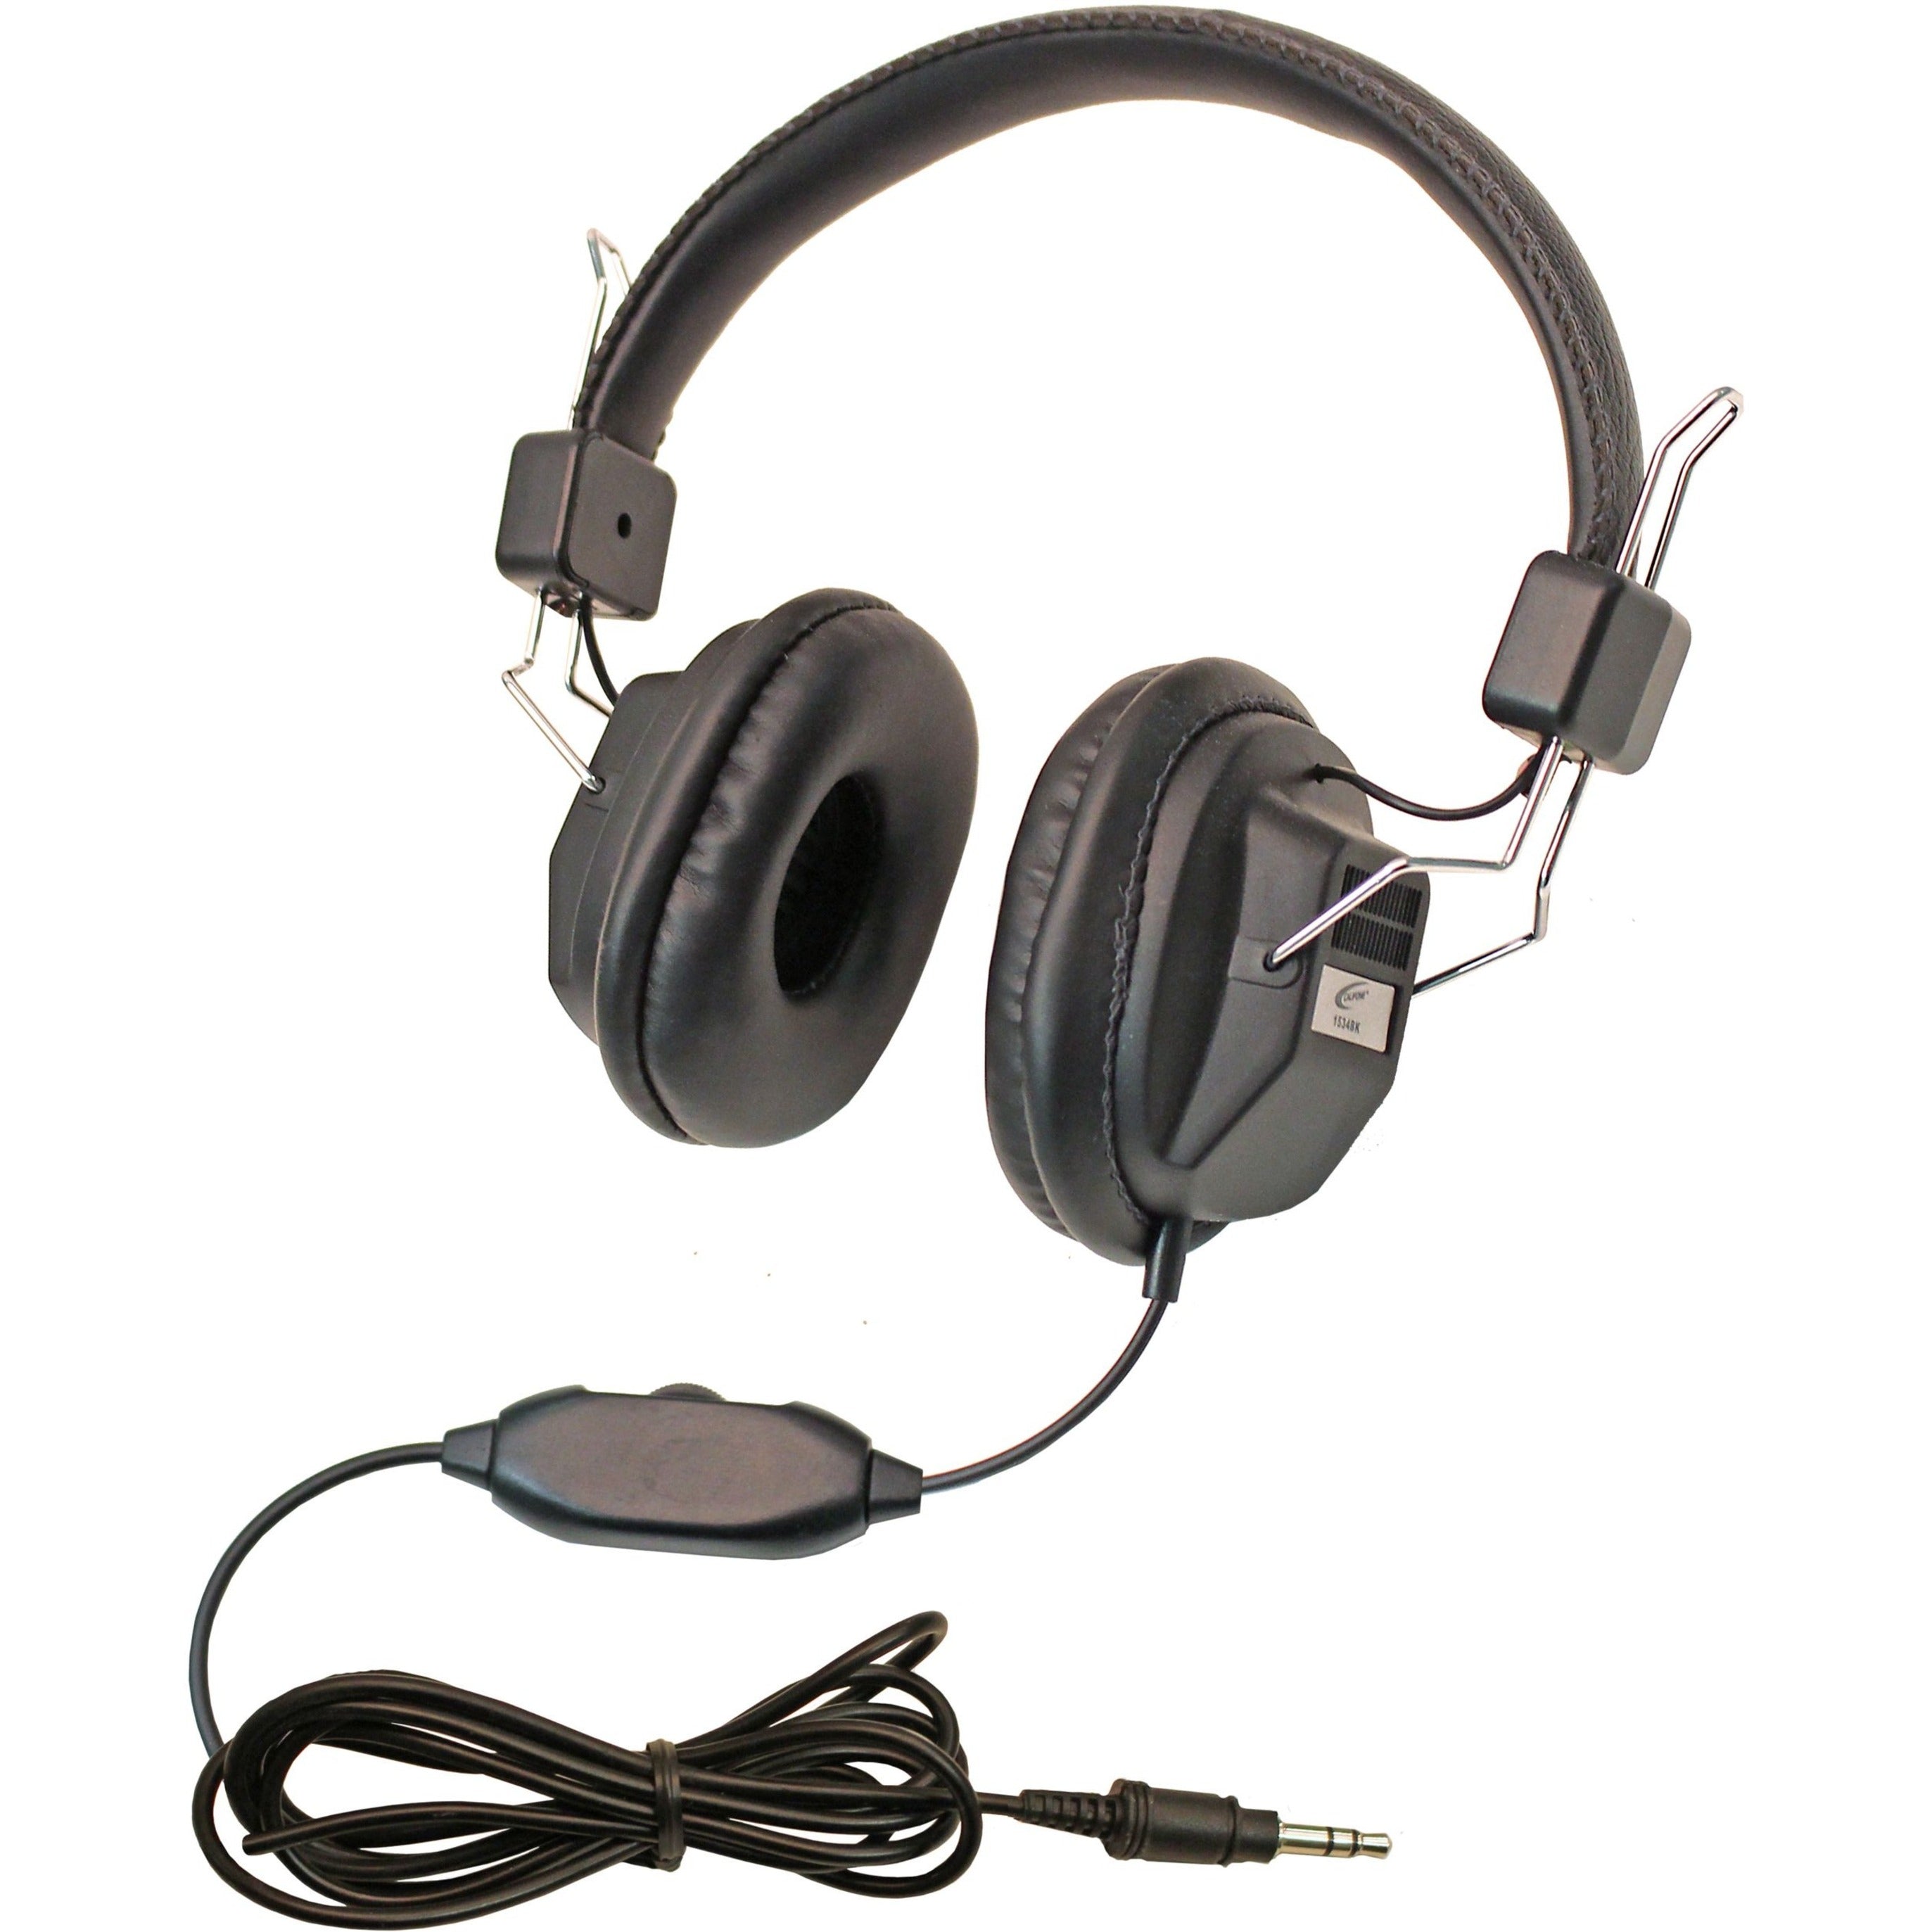 Califone 1534BK Kids Headphone, Wired Over-the-head Stereo Headphone with Padded Headband, Adjustable Headband, Rugged Design, and Noise Reduction